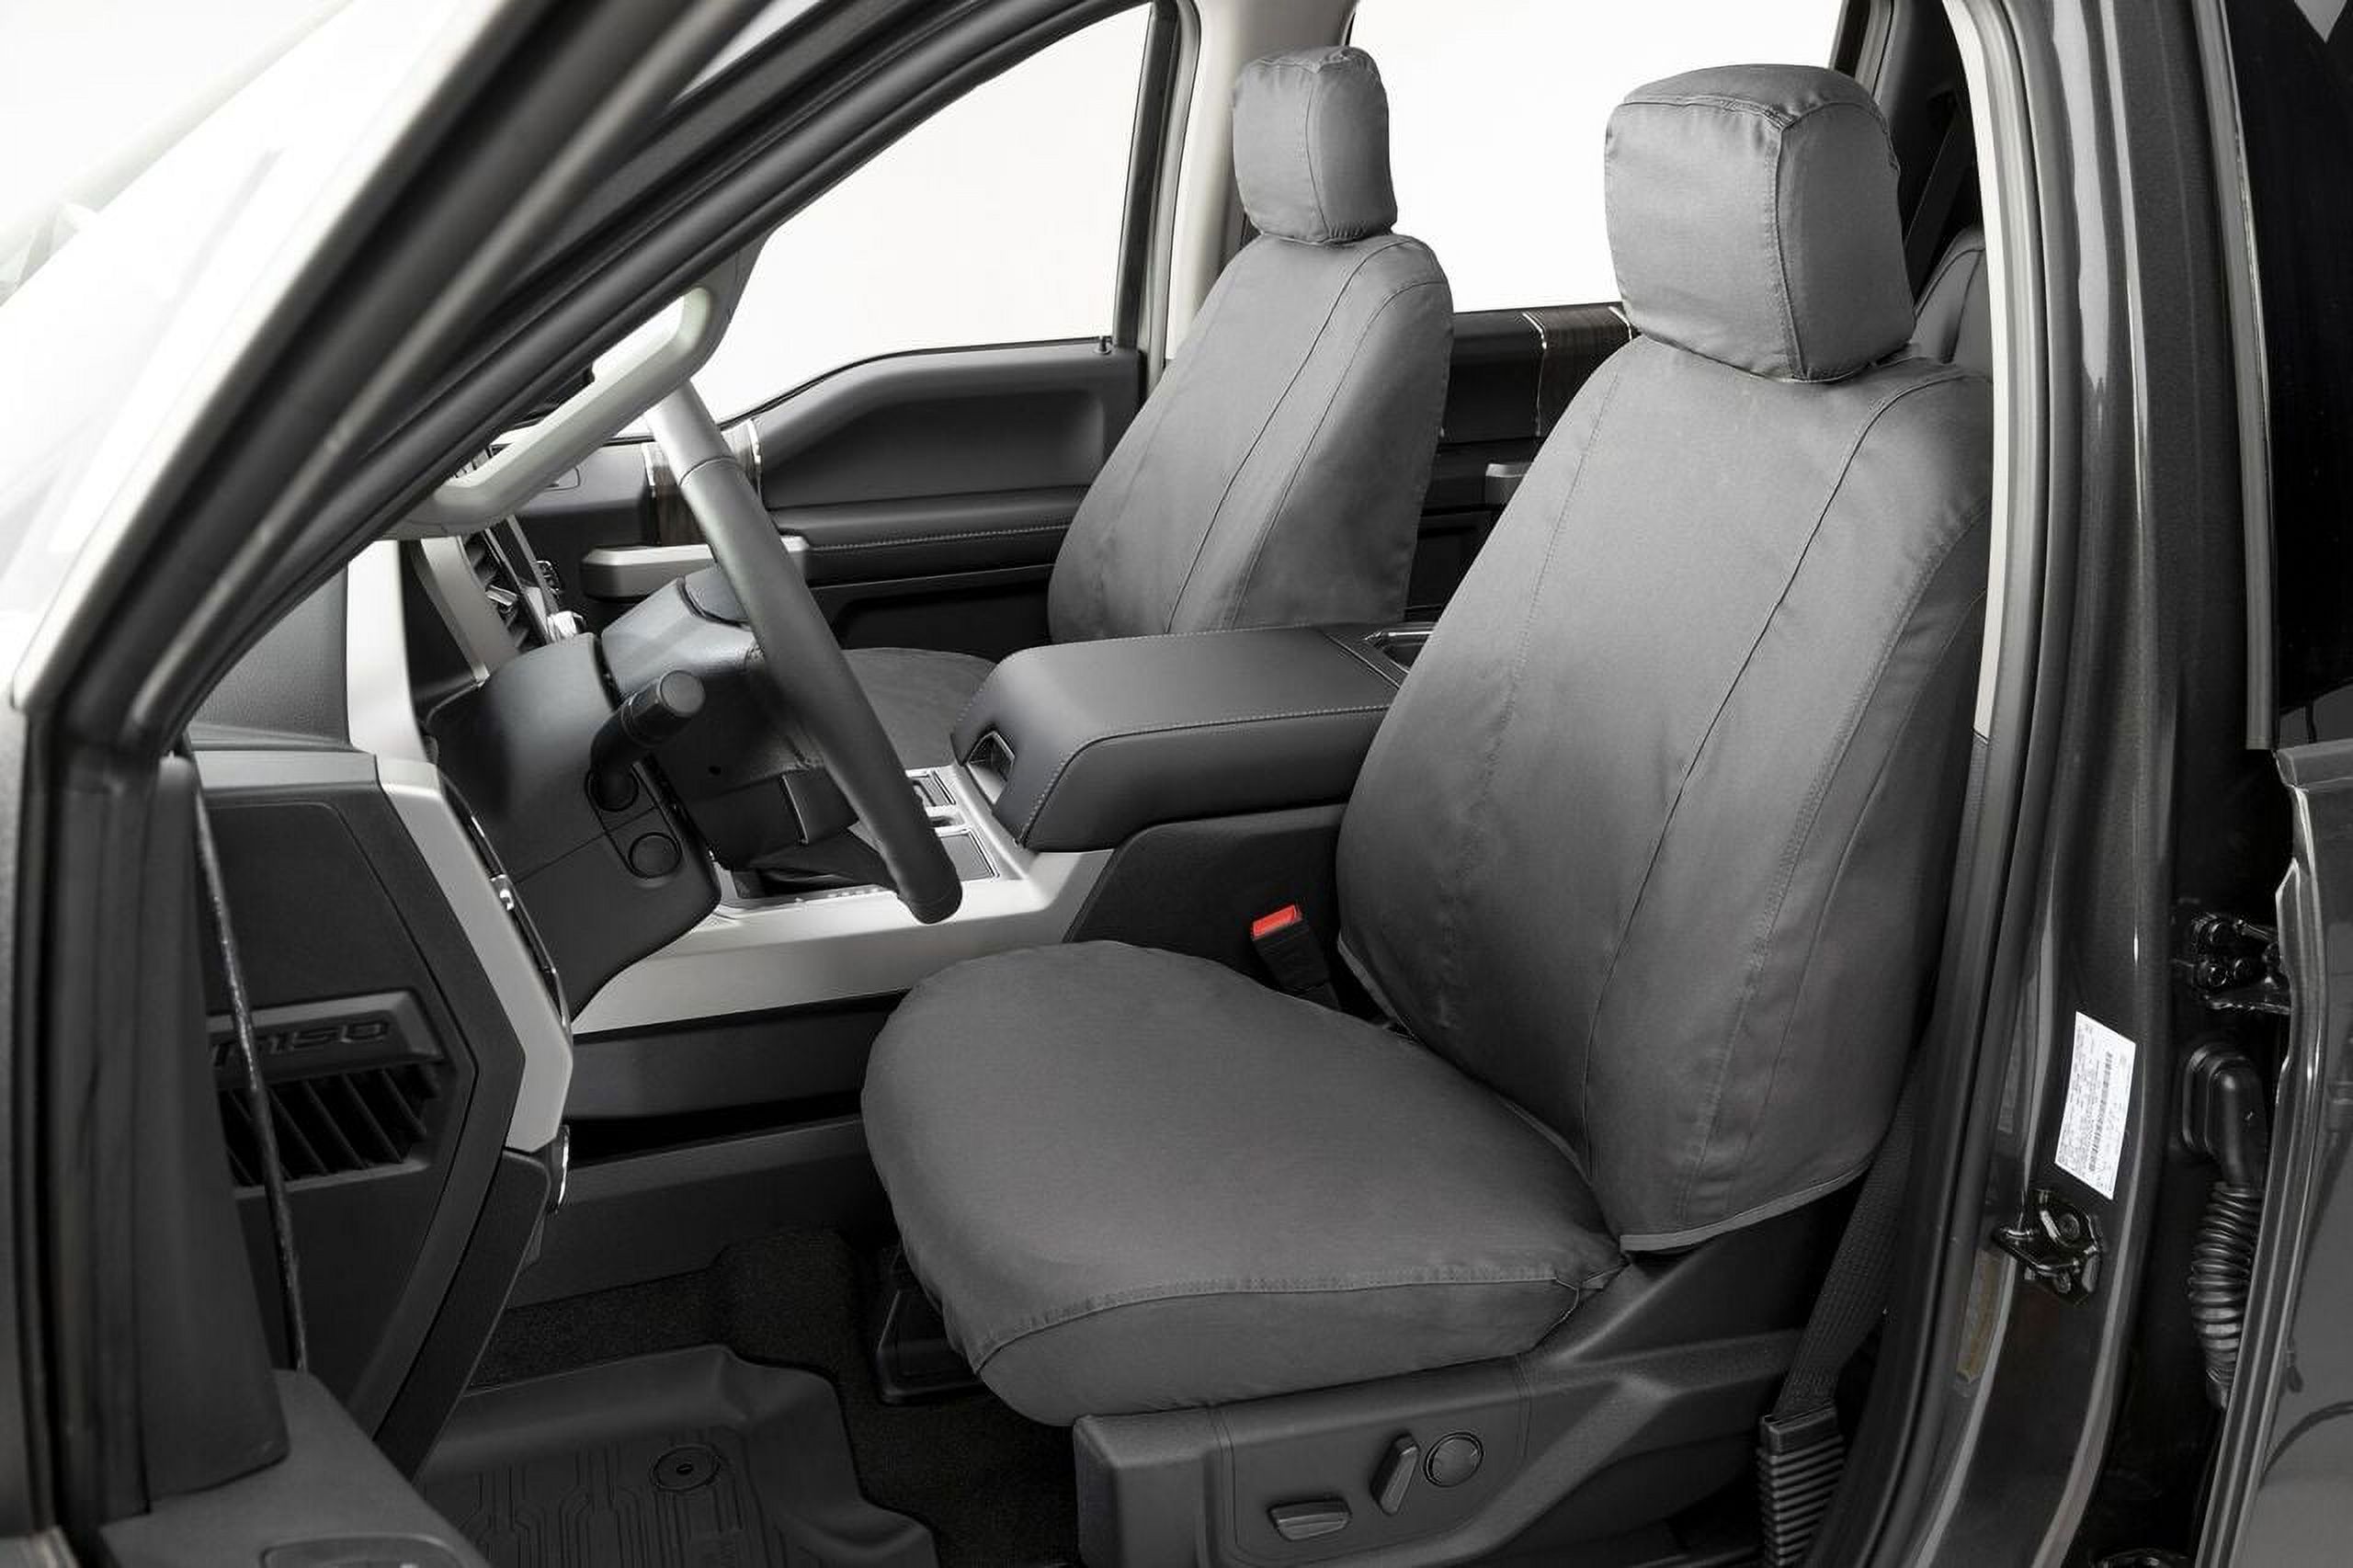 Covercraft SeatSaver Front Row Custom Fit Seat Cover for Select Cadillac/Chevrolet/GMC Models - Polycotton (Grey) Fits select: 2011 ,2013 CHEVROLET SILVERADO K1500 LT - image 2 of 2